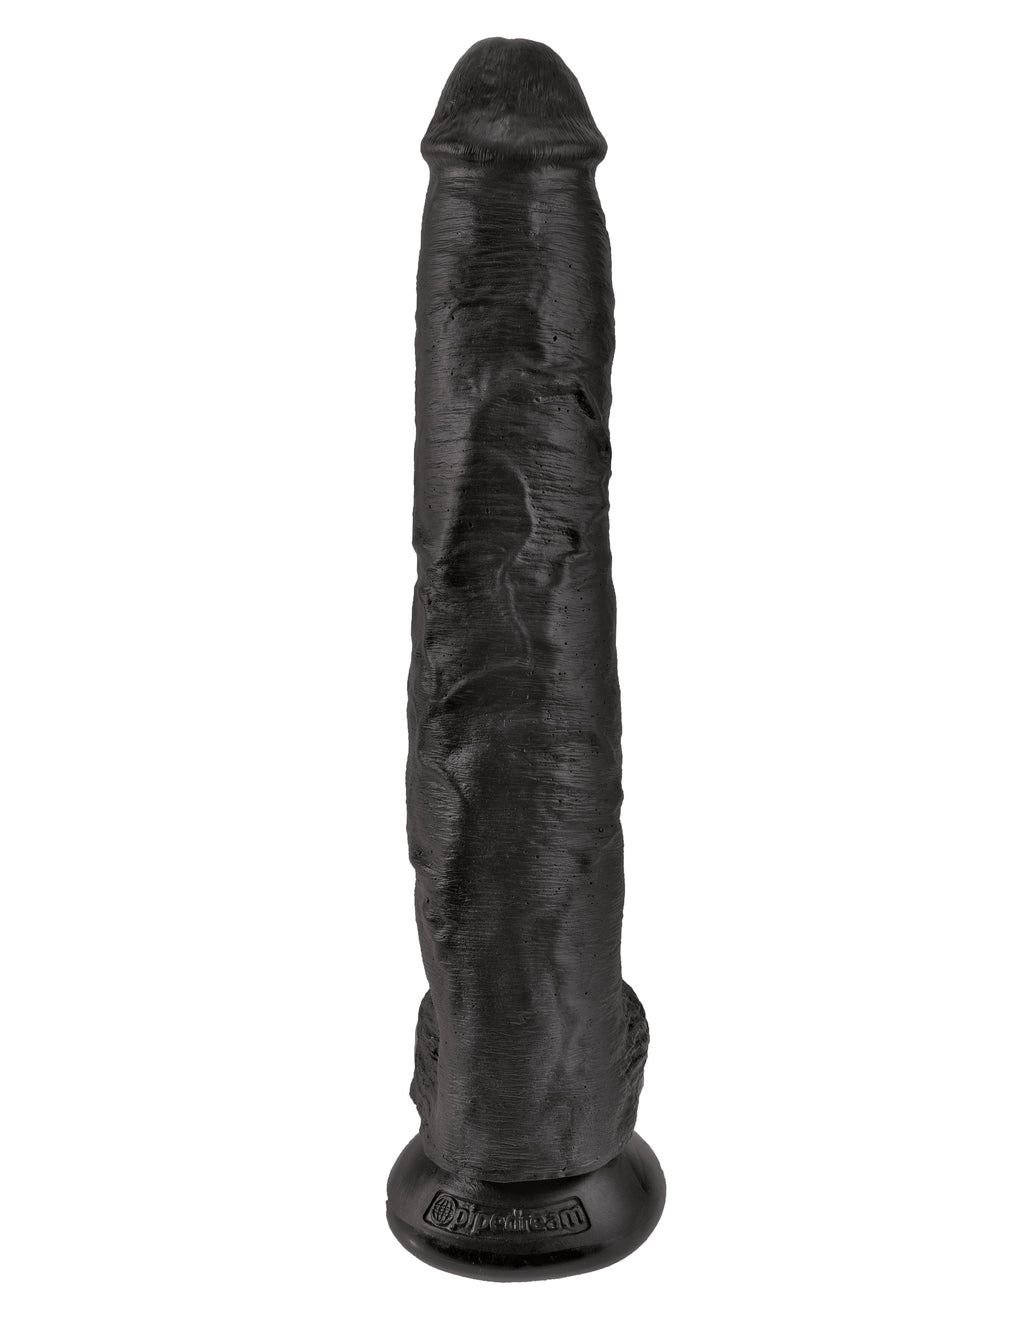 King Cock 14 Cock With Balls - Black PD5534-23